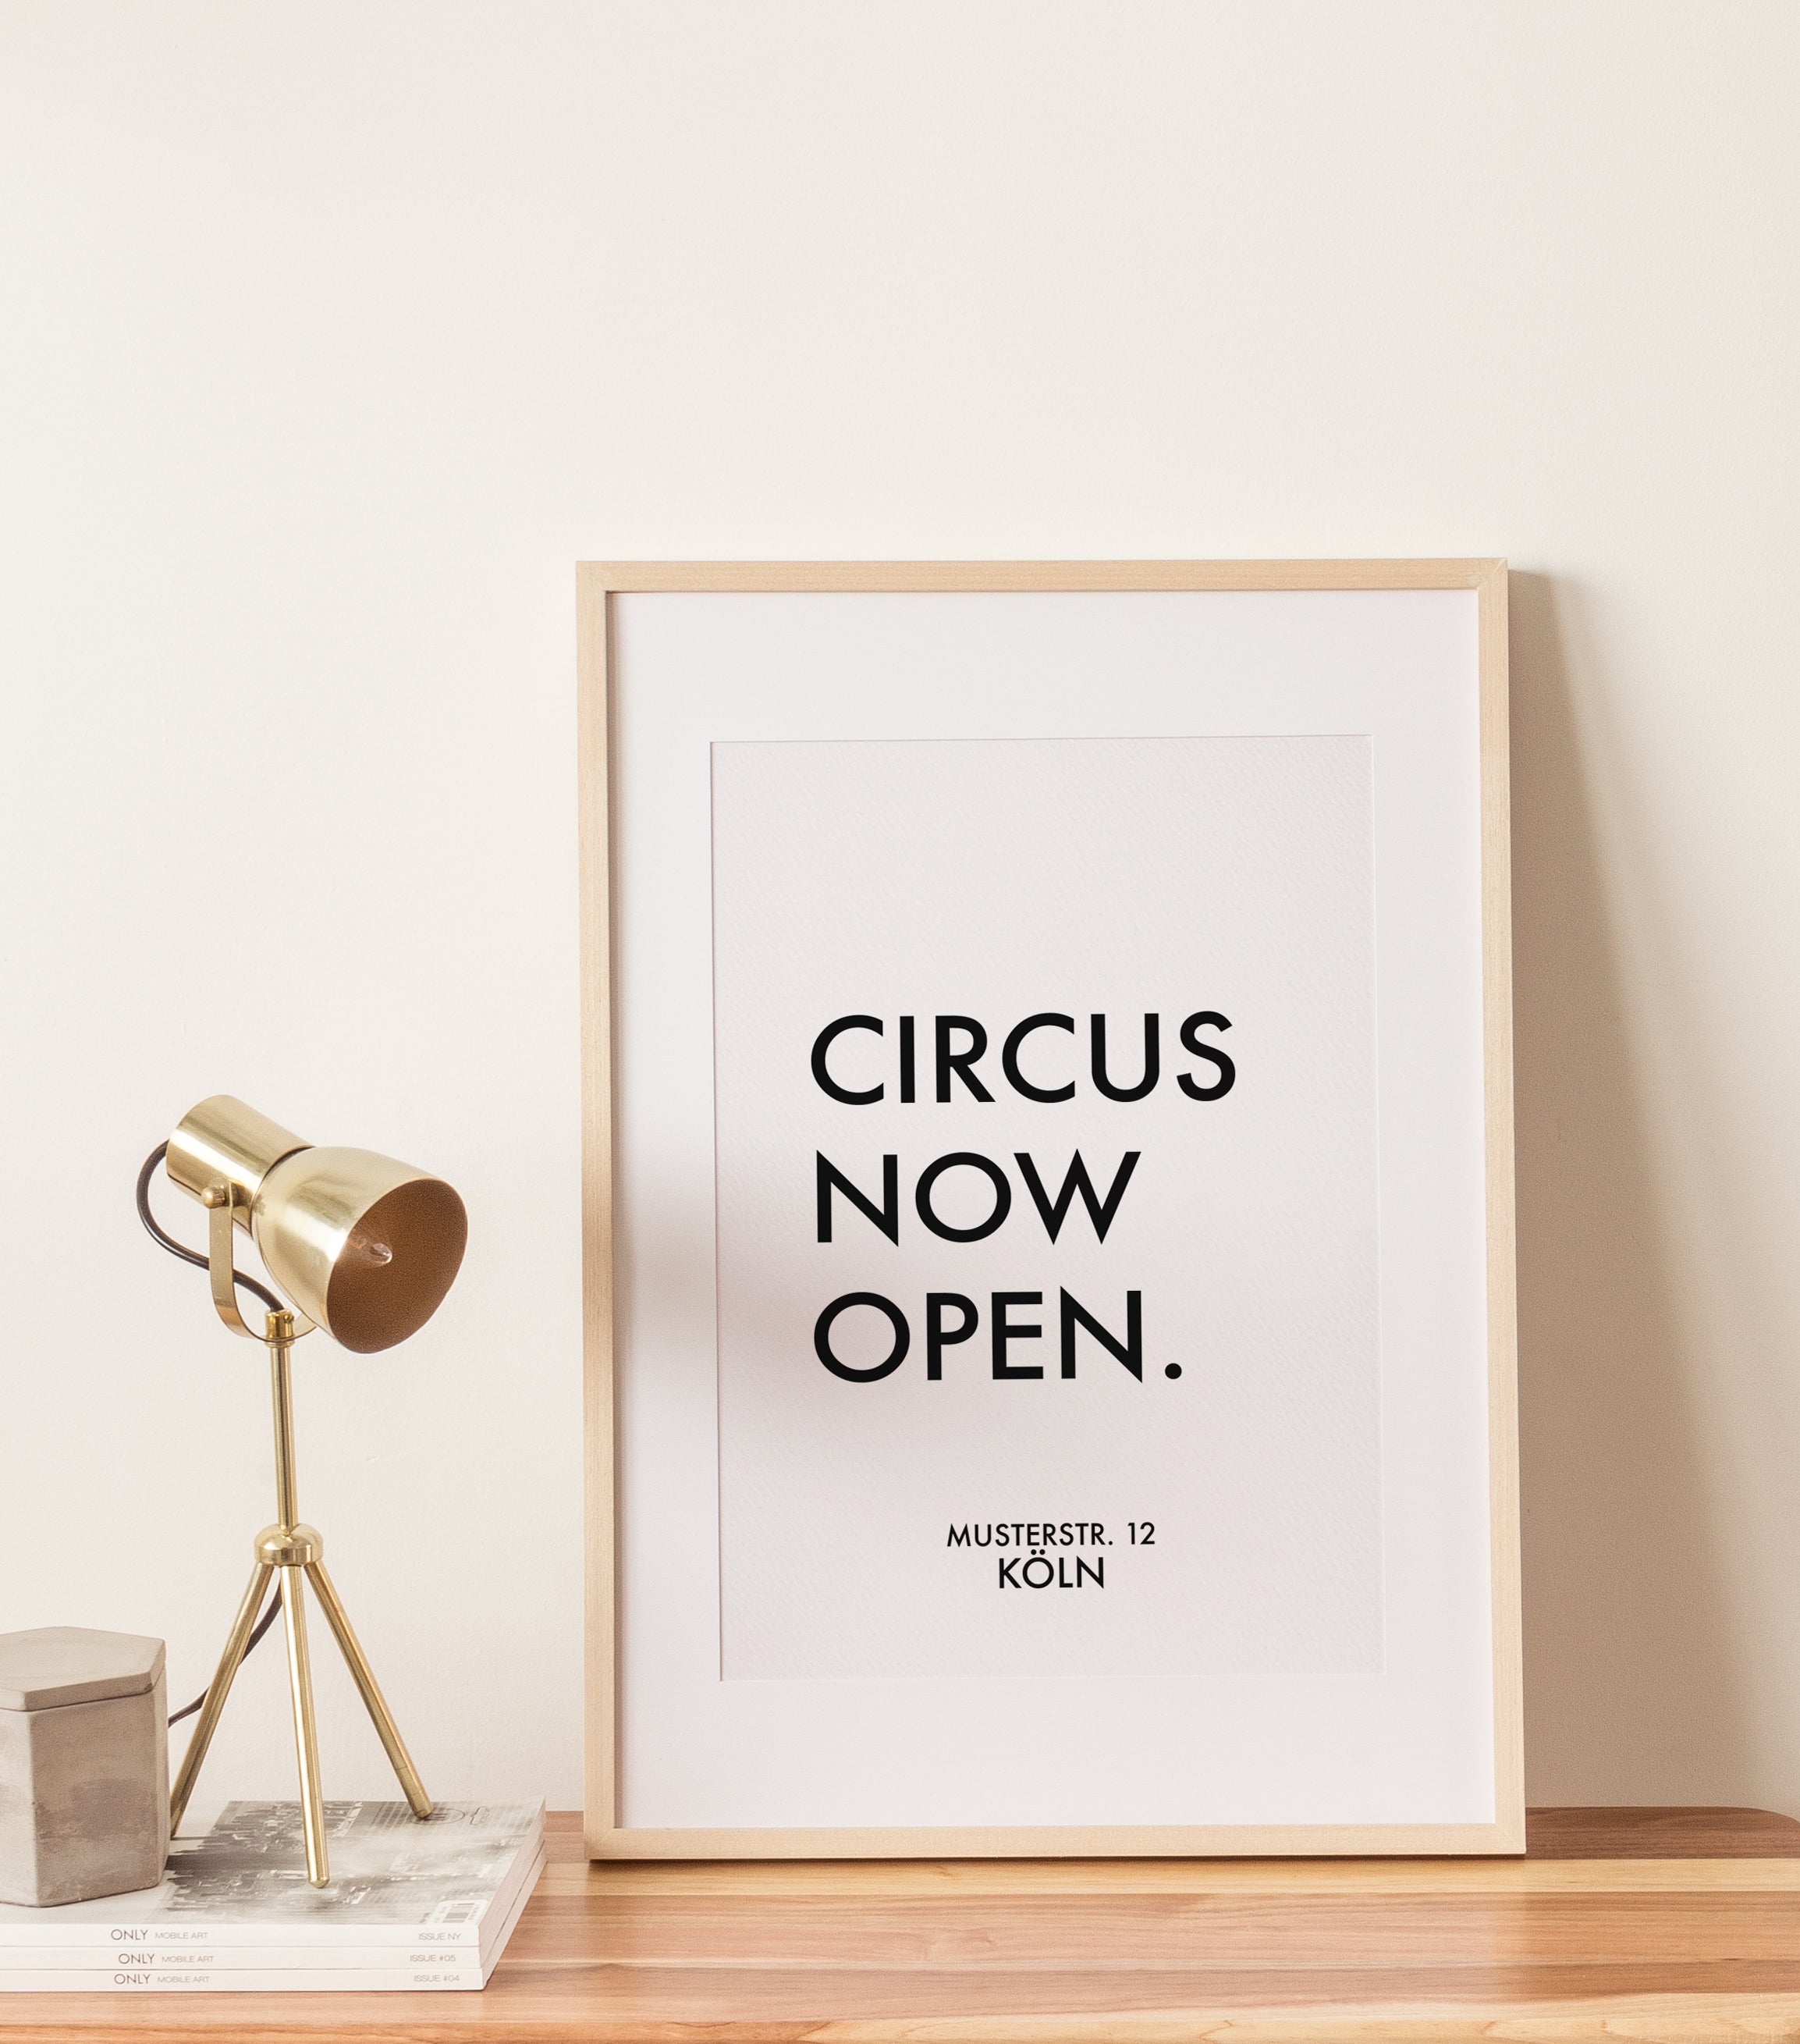 Circus now open - Poster